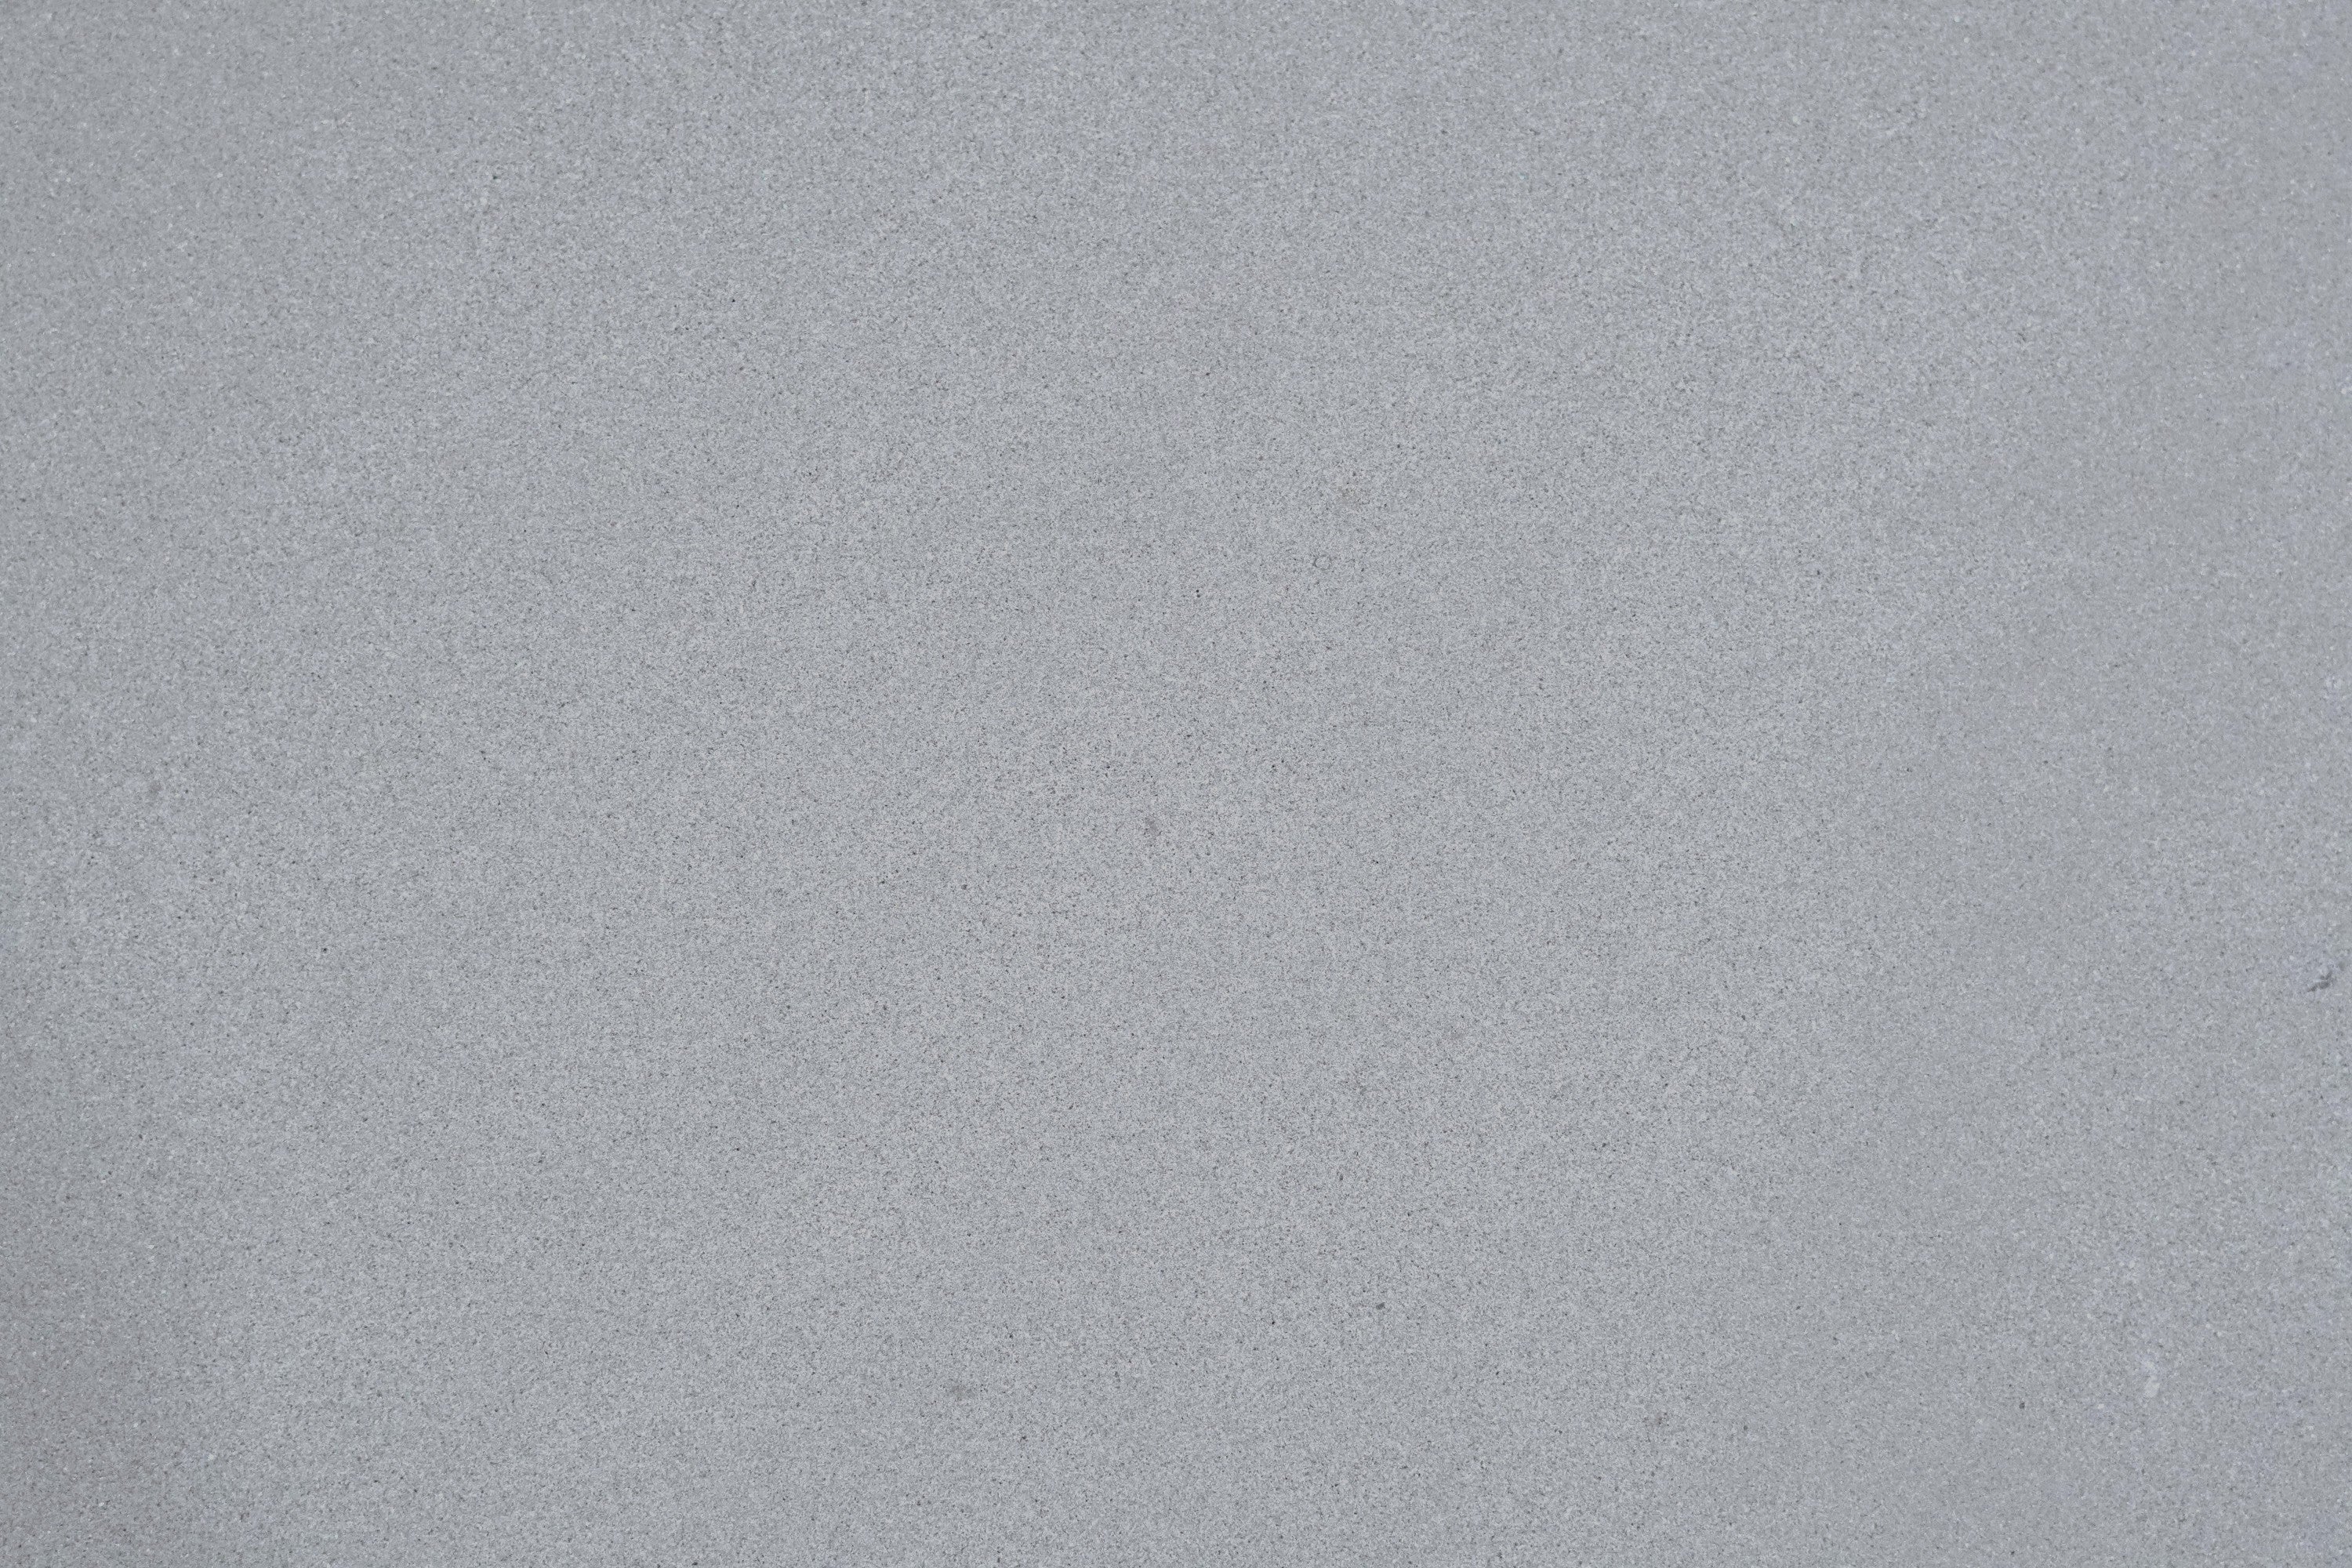 gray brocade natural limestone field tile pietra serena width of 16 length of 24 and thickness of 0.75 sold to you by surface group international